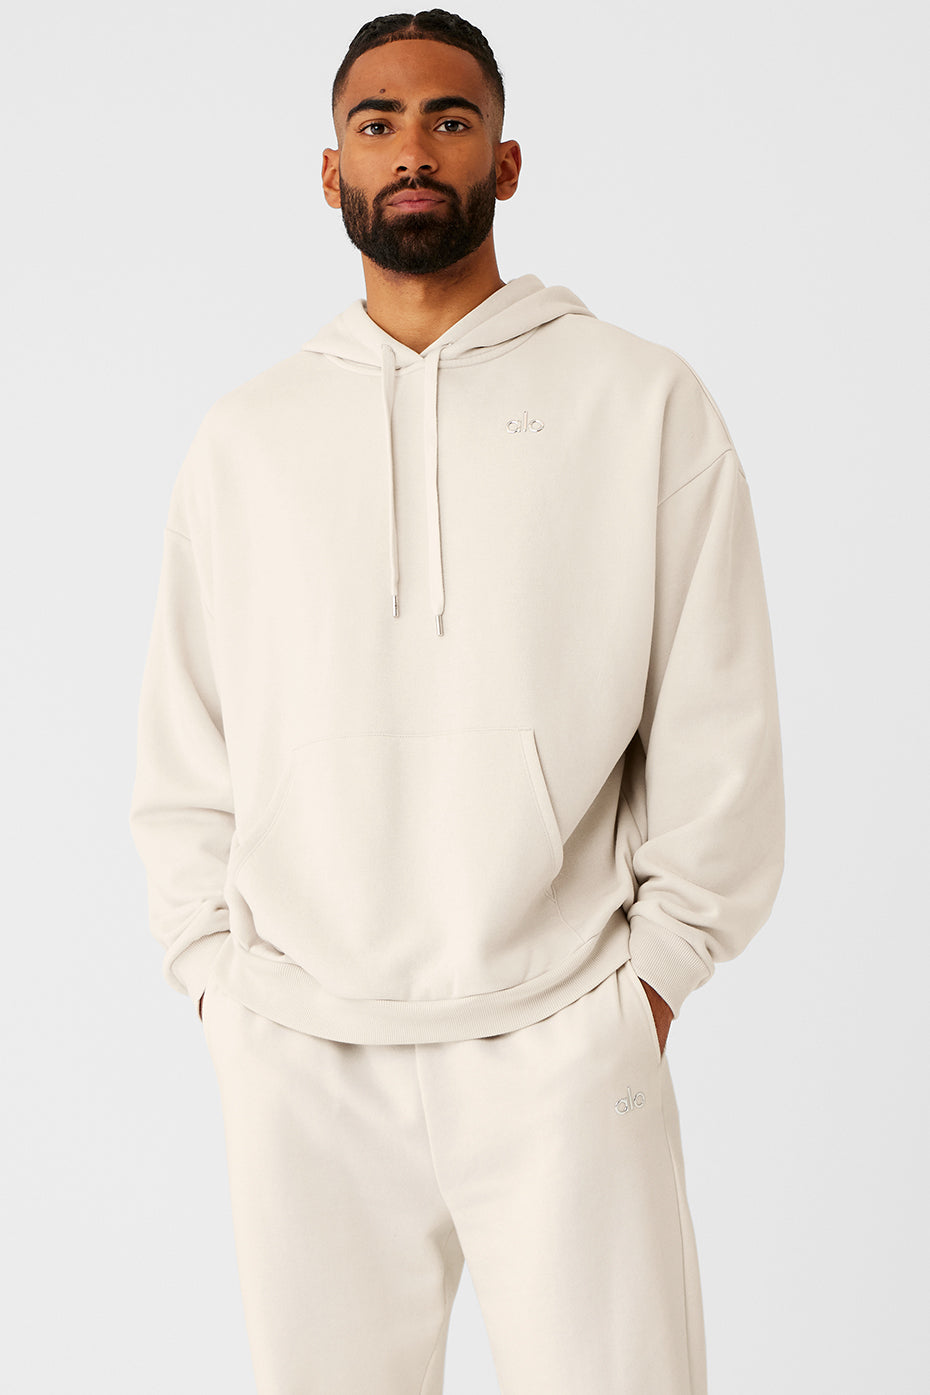 Accolade Hoodie in White by Alo Yoga - International Design Forum